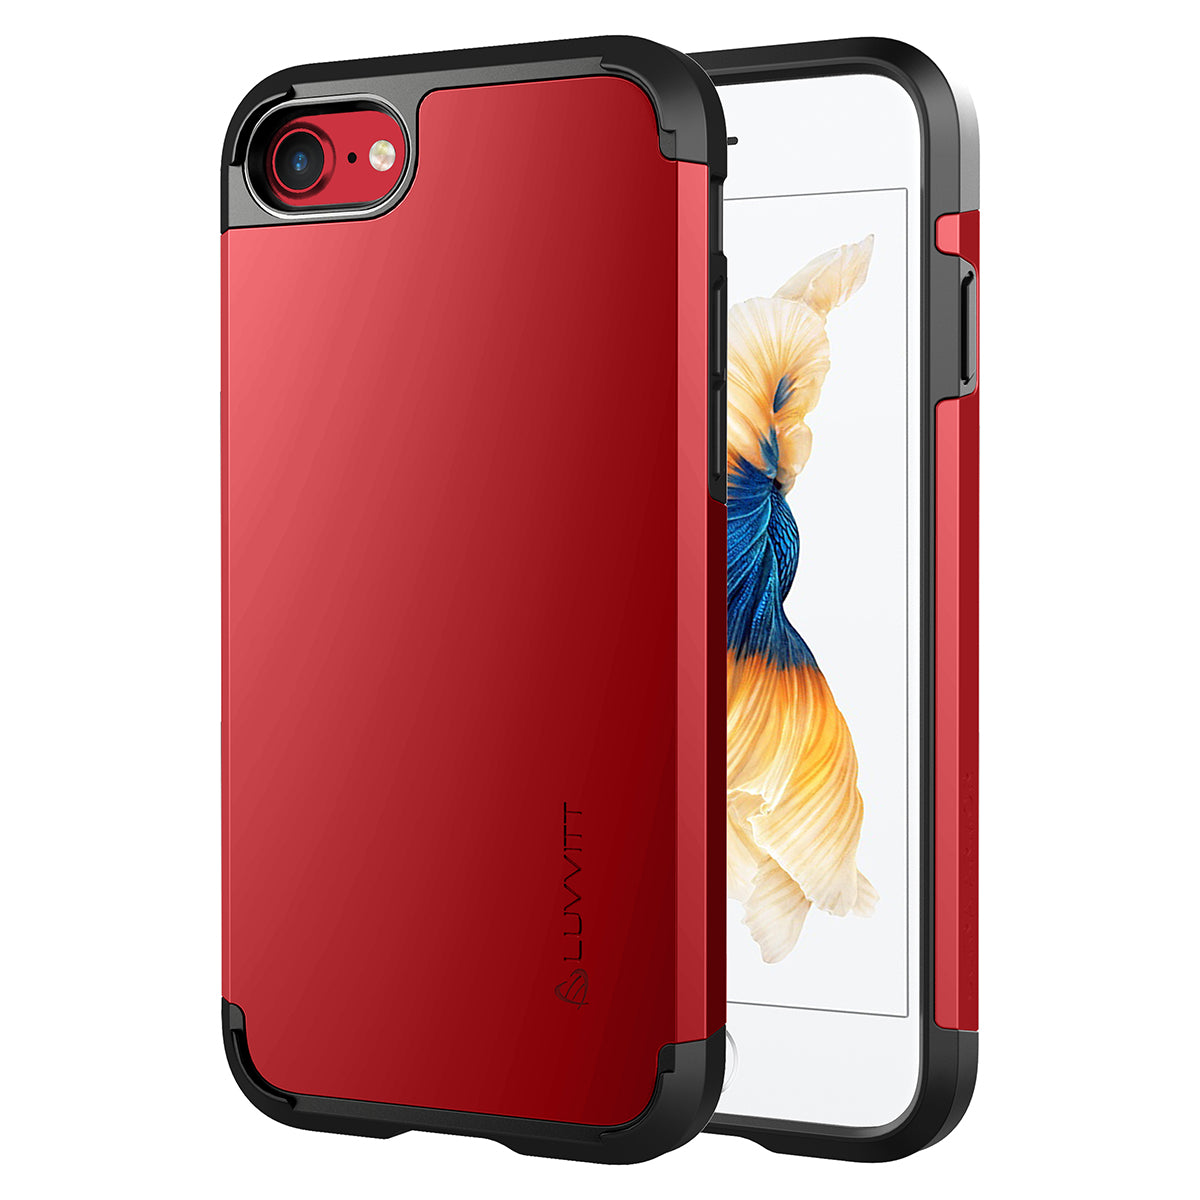 Luvvitt Ultra Armor Dual Layer Case for iPhone SE 2020 / iPhone 7 and 8 - Red